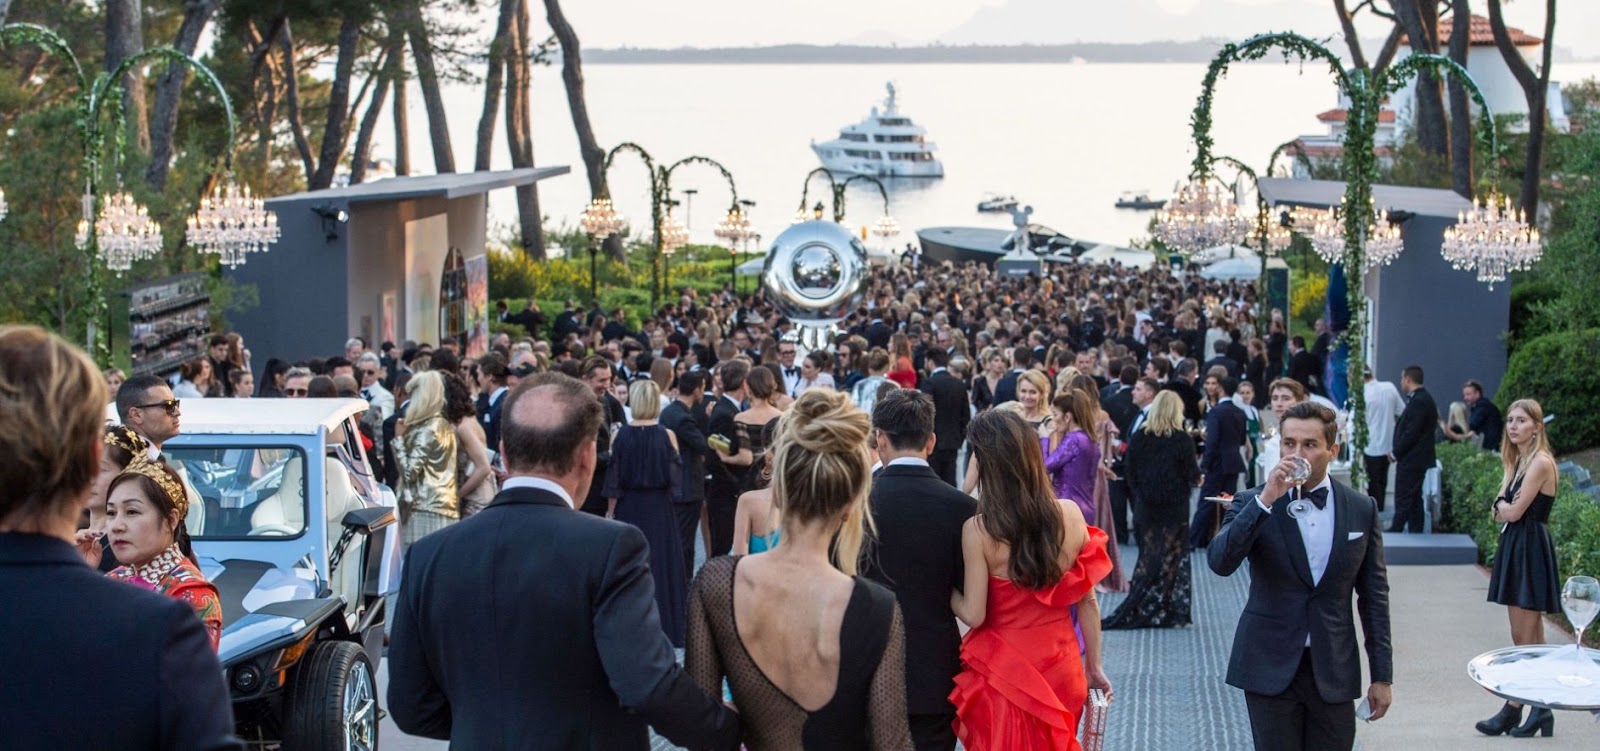 The Not-To-Be-Missed amfAR Gala Cannes